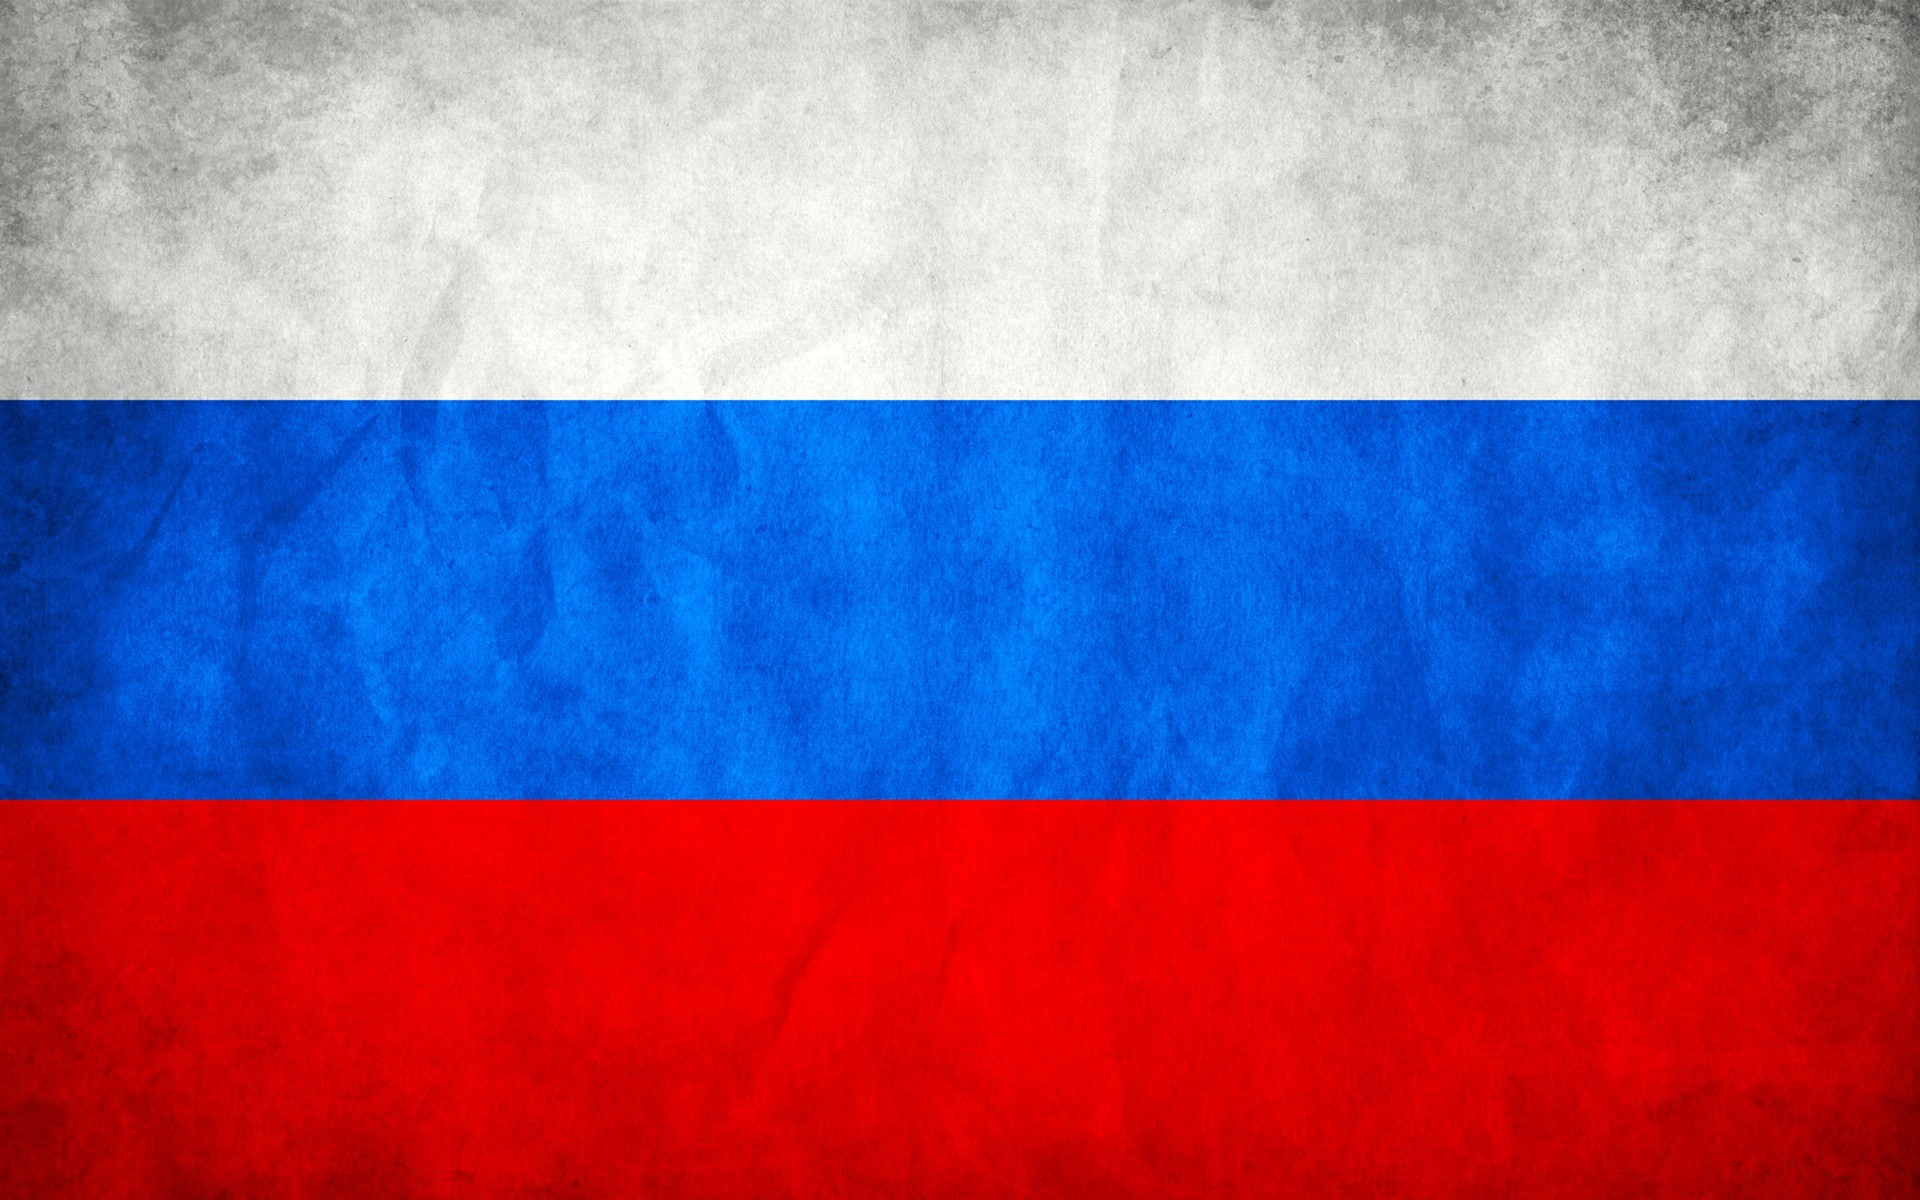 1920x1200 Russia Grungy Flag Wallpaper Russia World Wallpapers